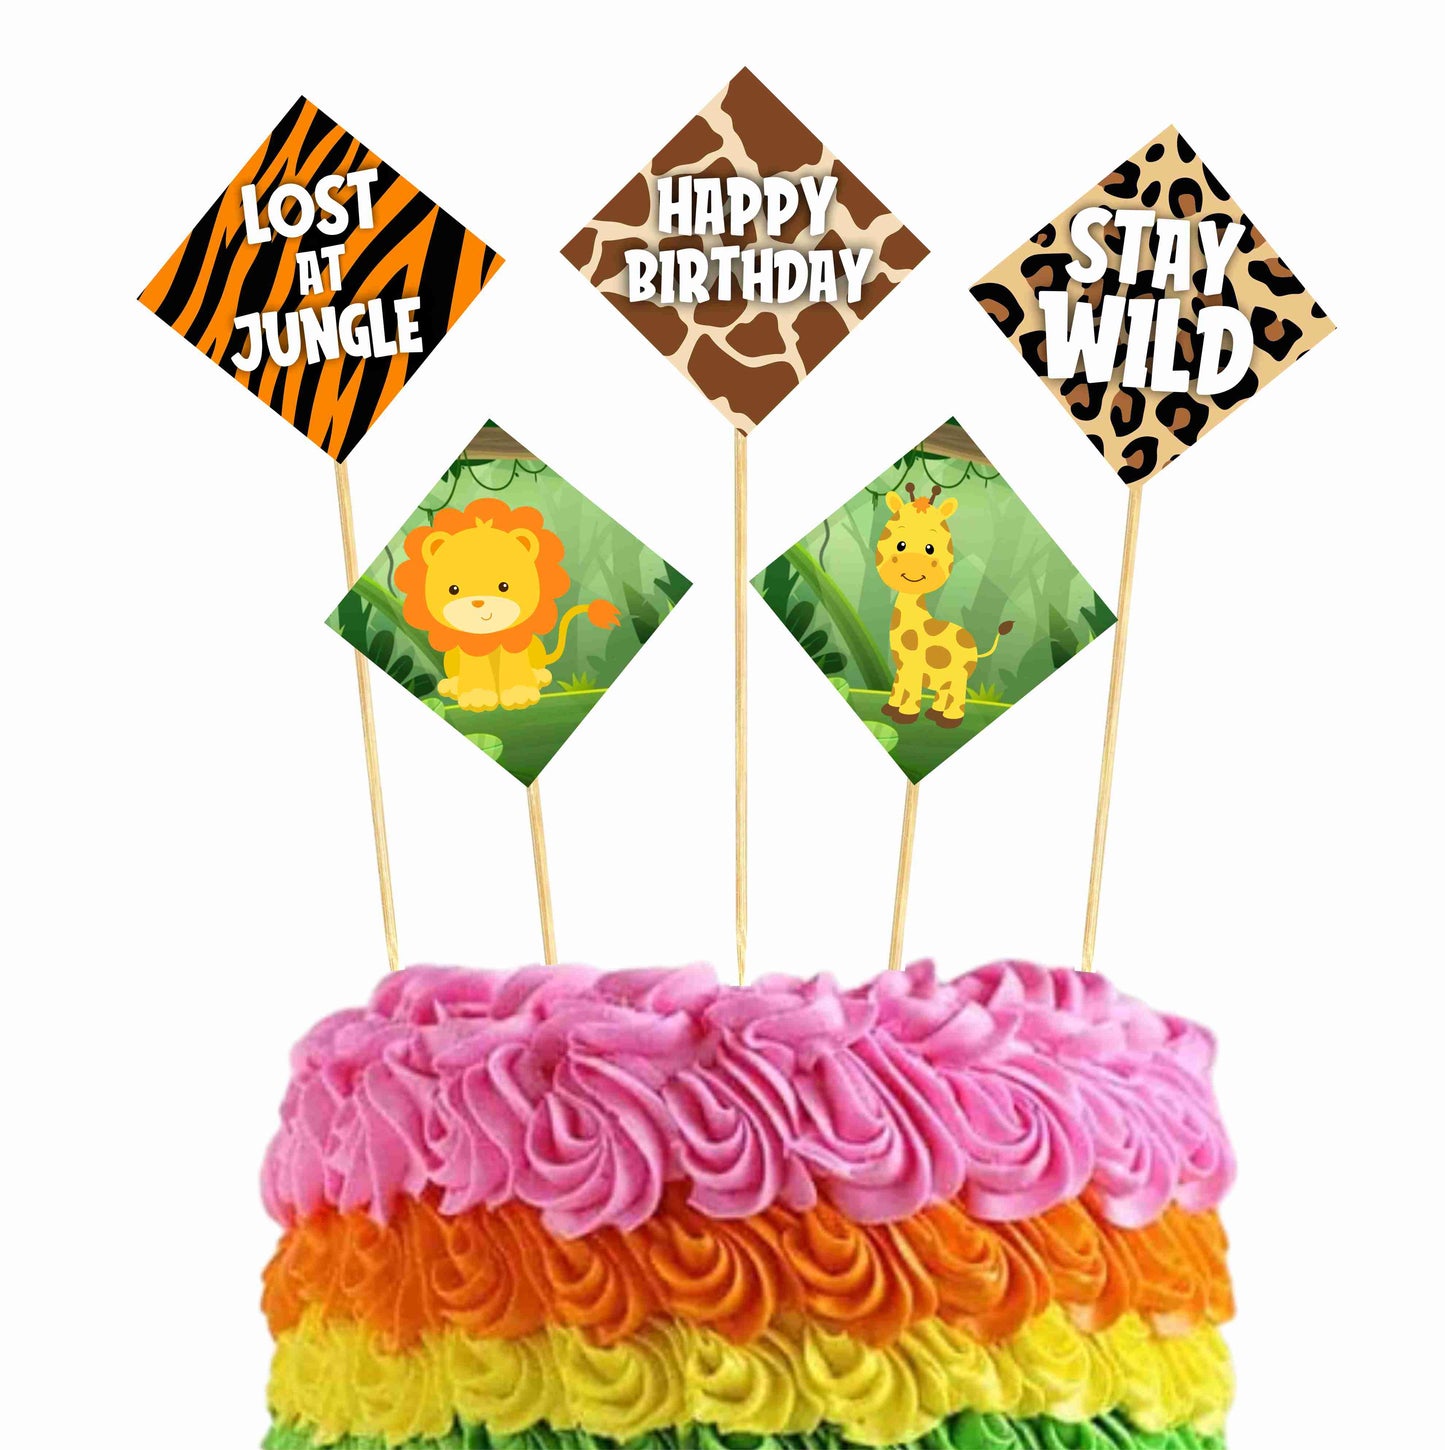 African Safari Theme Cake Topper Pack of 10 Nos for Birthday Cake Decoration Theme Party Item For Boys Girls Adults Birthday Theme Decor